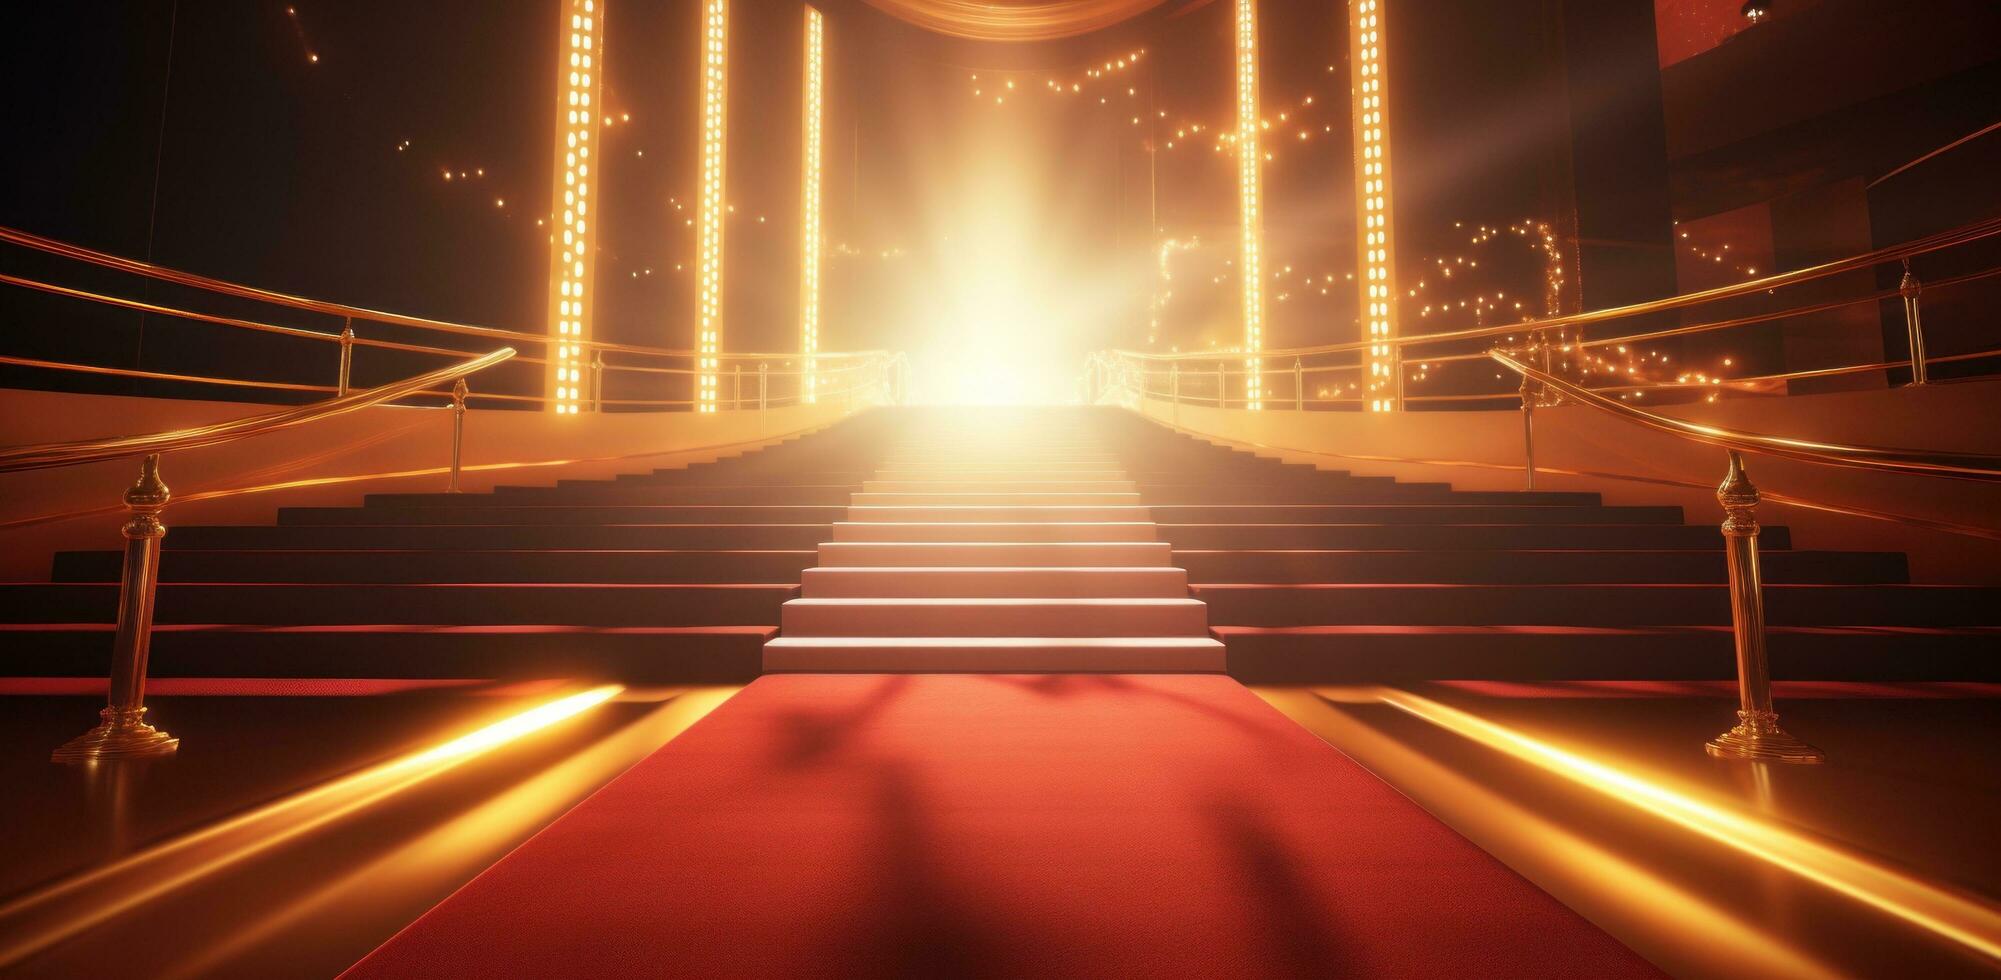 AI generated red carpet and gold ropes at a golden staircase photo